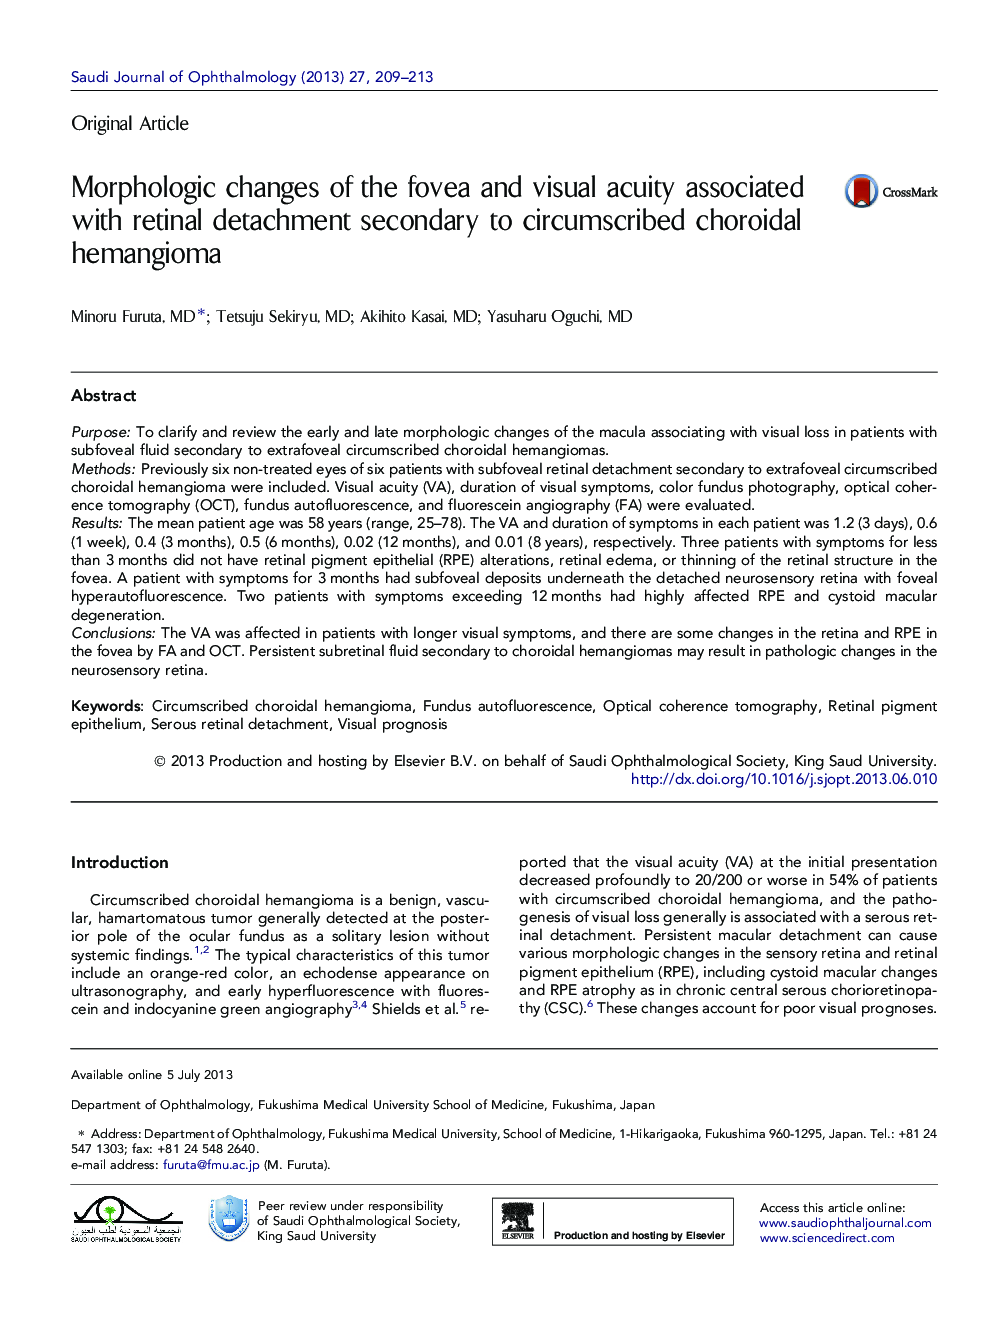 Morphologic changes of the fovea and visual acuity associated with retinal detachment secondary to circumscribed choroidal hemangioma 